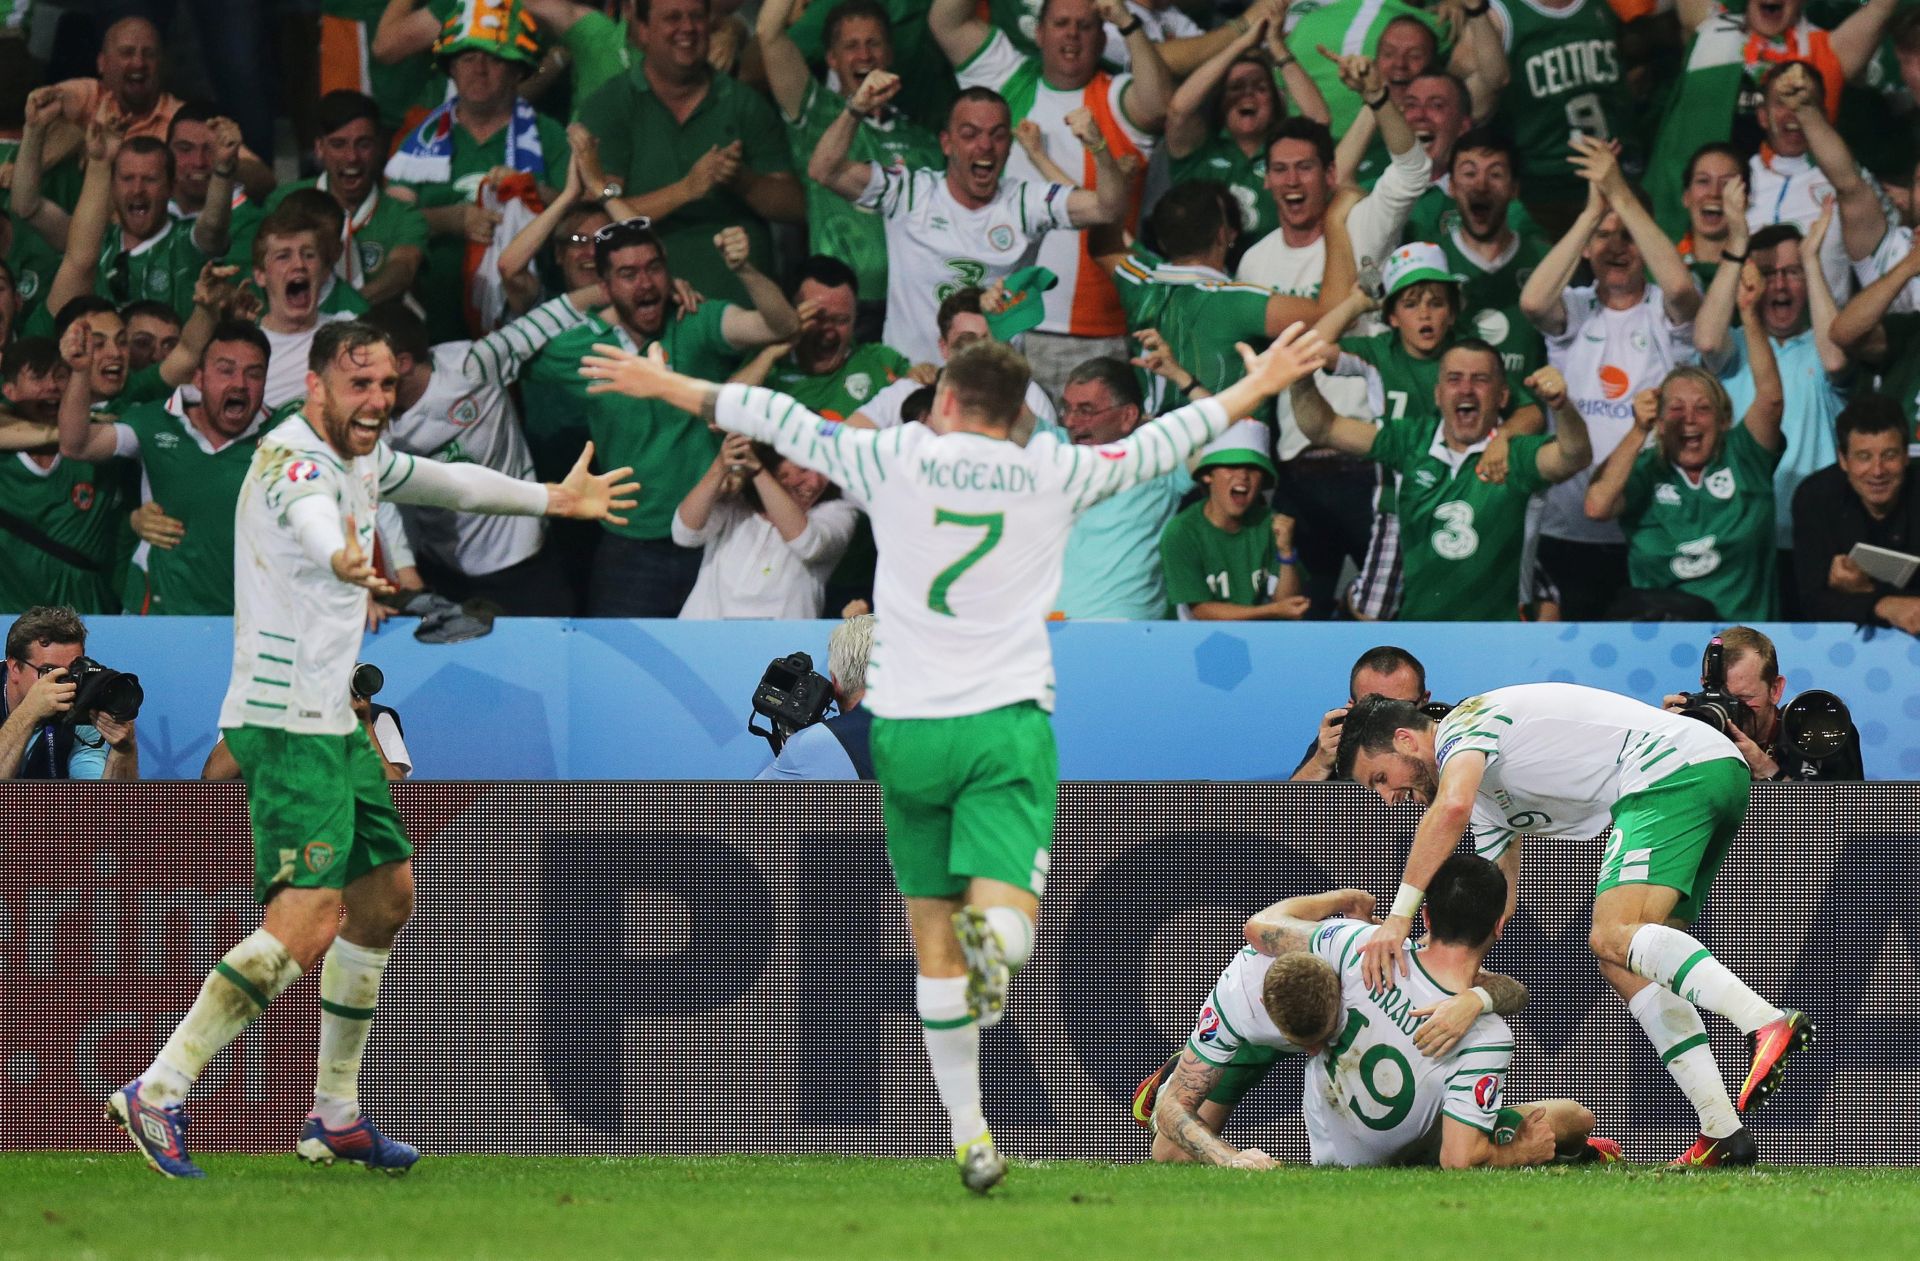 epa05384898 Ireland players celebrate after Robbie Brady (no.19) scored the 1-0 during the UEFA EURO 2016 group E preliminary round match between Italy and Ireland at Stade Pierre Mauroy in Lille Metropole, France, 22 June 2016.

(RESTRICTIONS APPLY: For editorial news reporting purposes only. Not used for commercial or marketing purposes without prior written approval of UEFA. Images must appear as still images and must not emulate match action video footage. Photographs published in online publications (whether via the Internet or otherwise) shall have an interval of at least 20 seconds between the posting.)  EPA/MOHAMED MESSARA   EDITORIAL USE ONLY